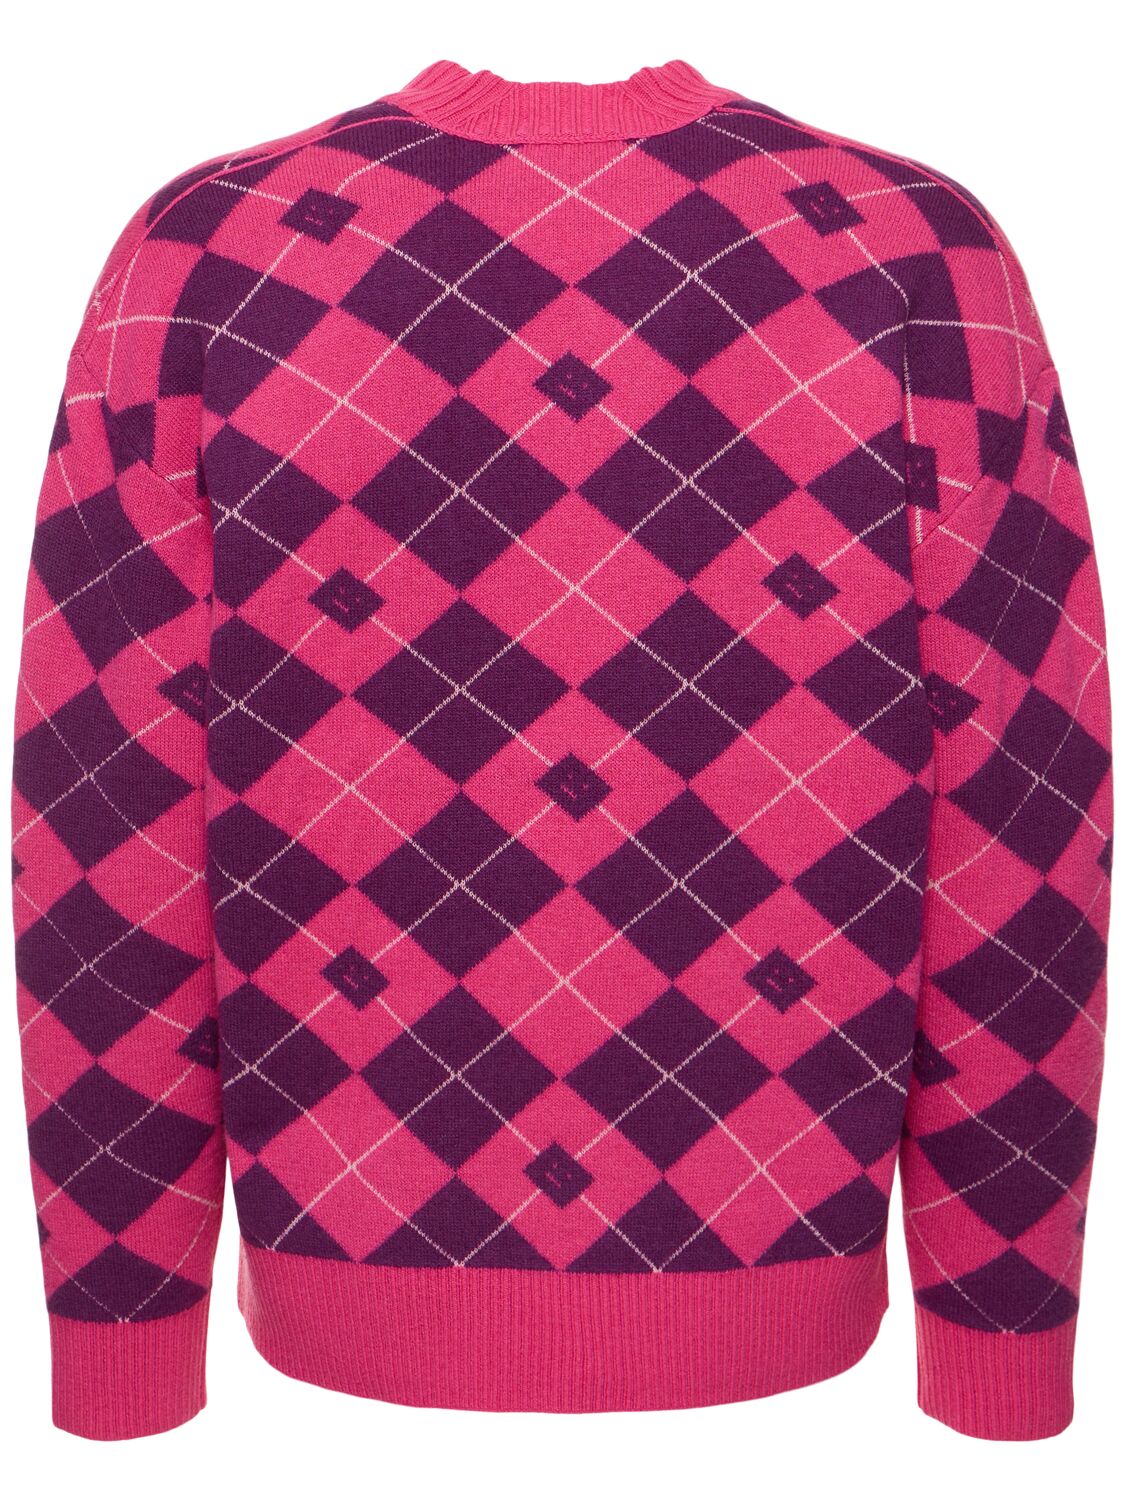 Shop Acne Studios Kwan Wool Blend Knit V Neck Sweater In Bright Pink